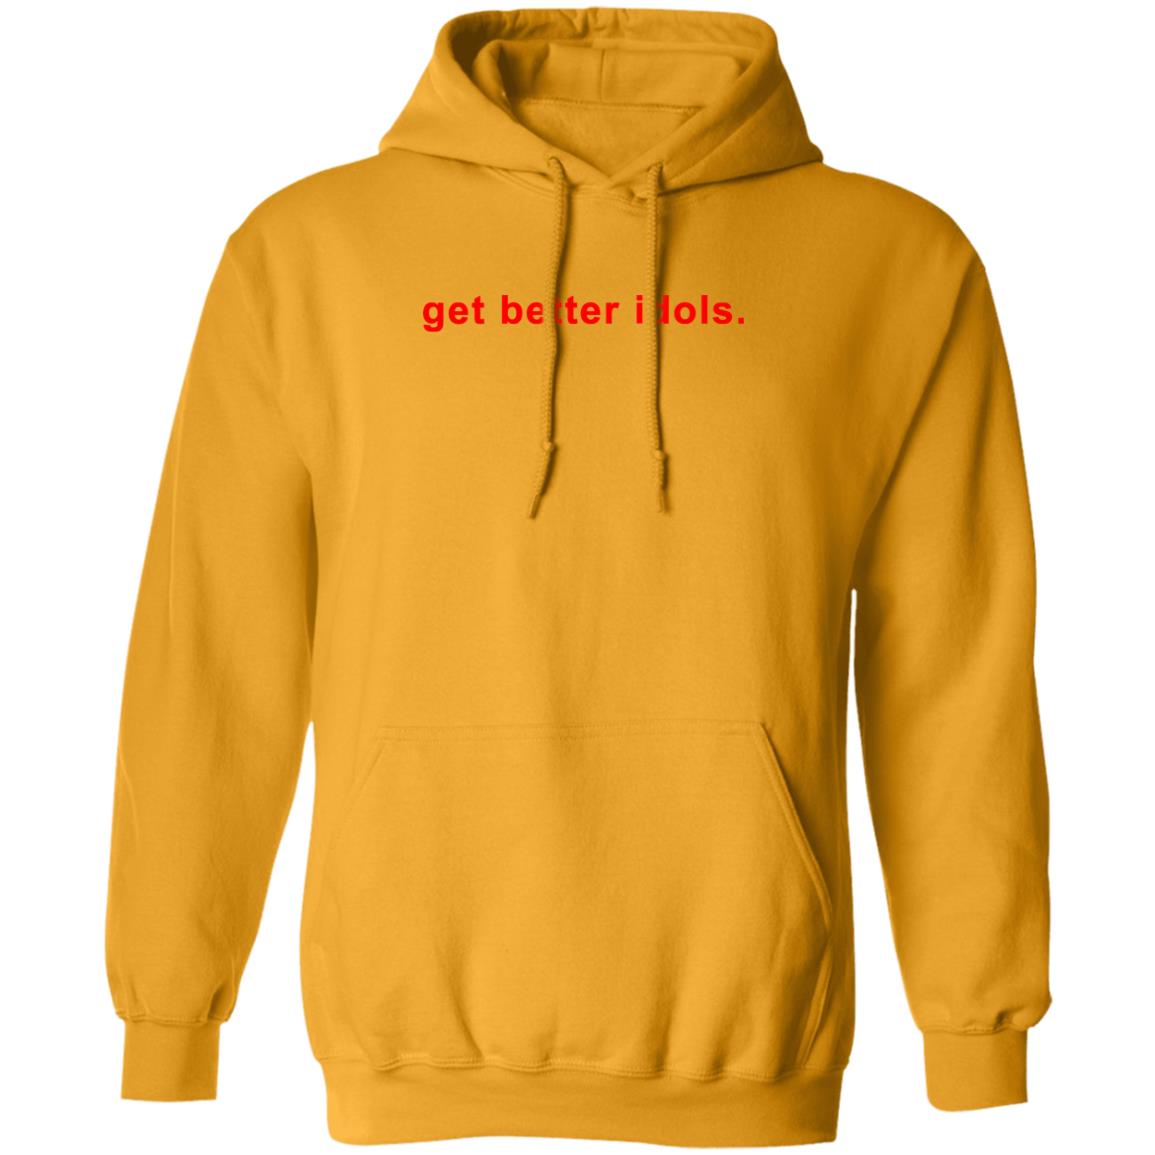 Bailey Sarian Merch GBI Embroidered Gold Hoodie
#BaileySarian #Merchandise #GBI #GoldHoodie #LimitedEdition #Fashion #Style #HoodieSeason #Apparel #ExclusiveRelease #Fashionista #MustHave

tipatee.com/product/bailey…